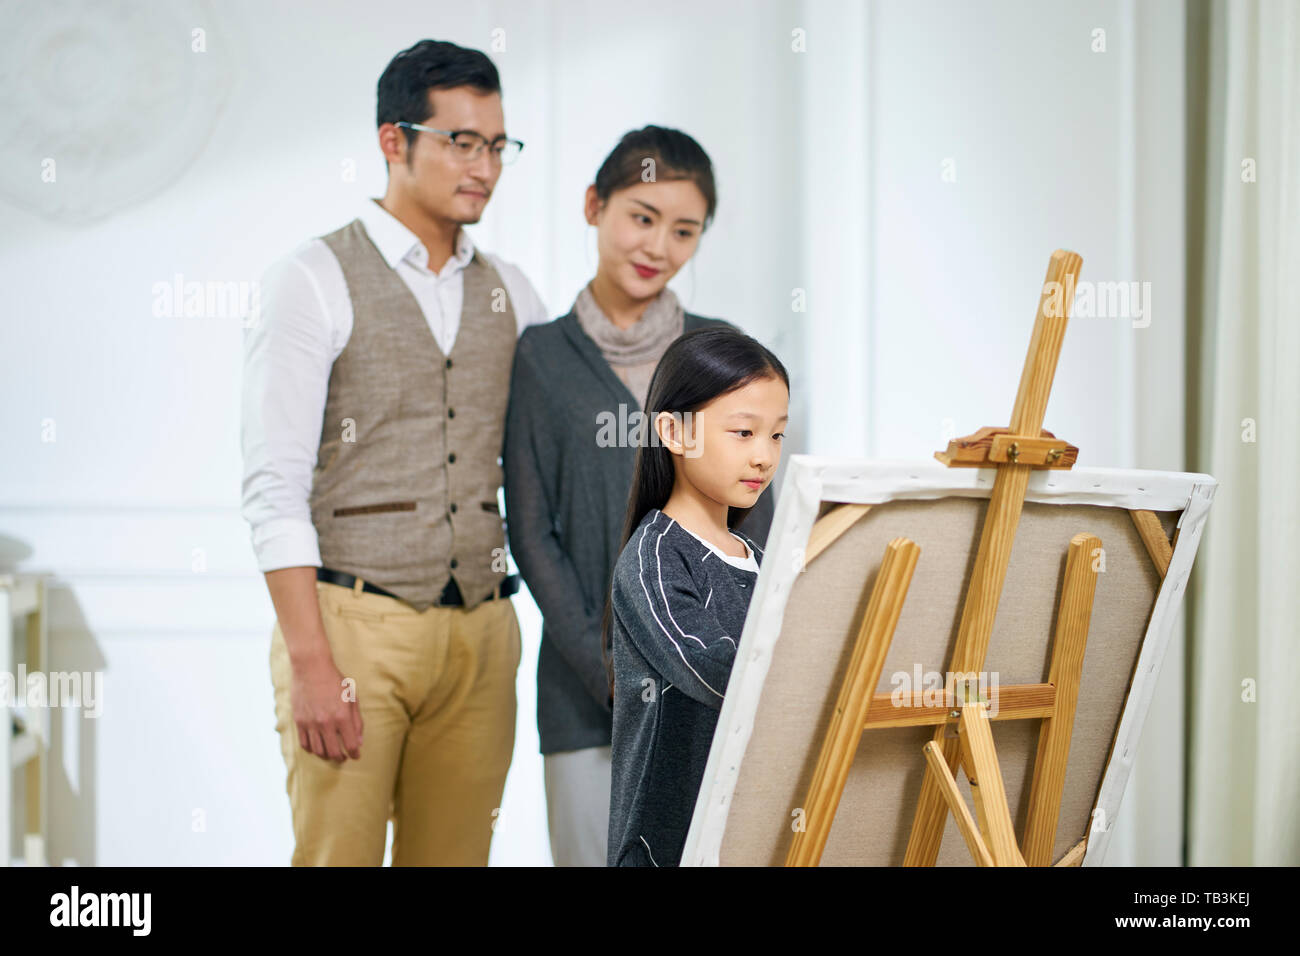 beautiful little asian girl with long black hair making a painting on canvas while parents standing behind watching. Stock Photo